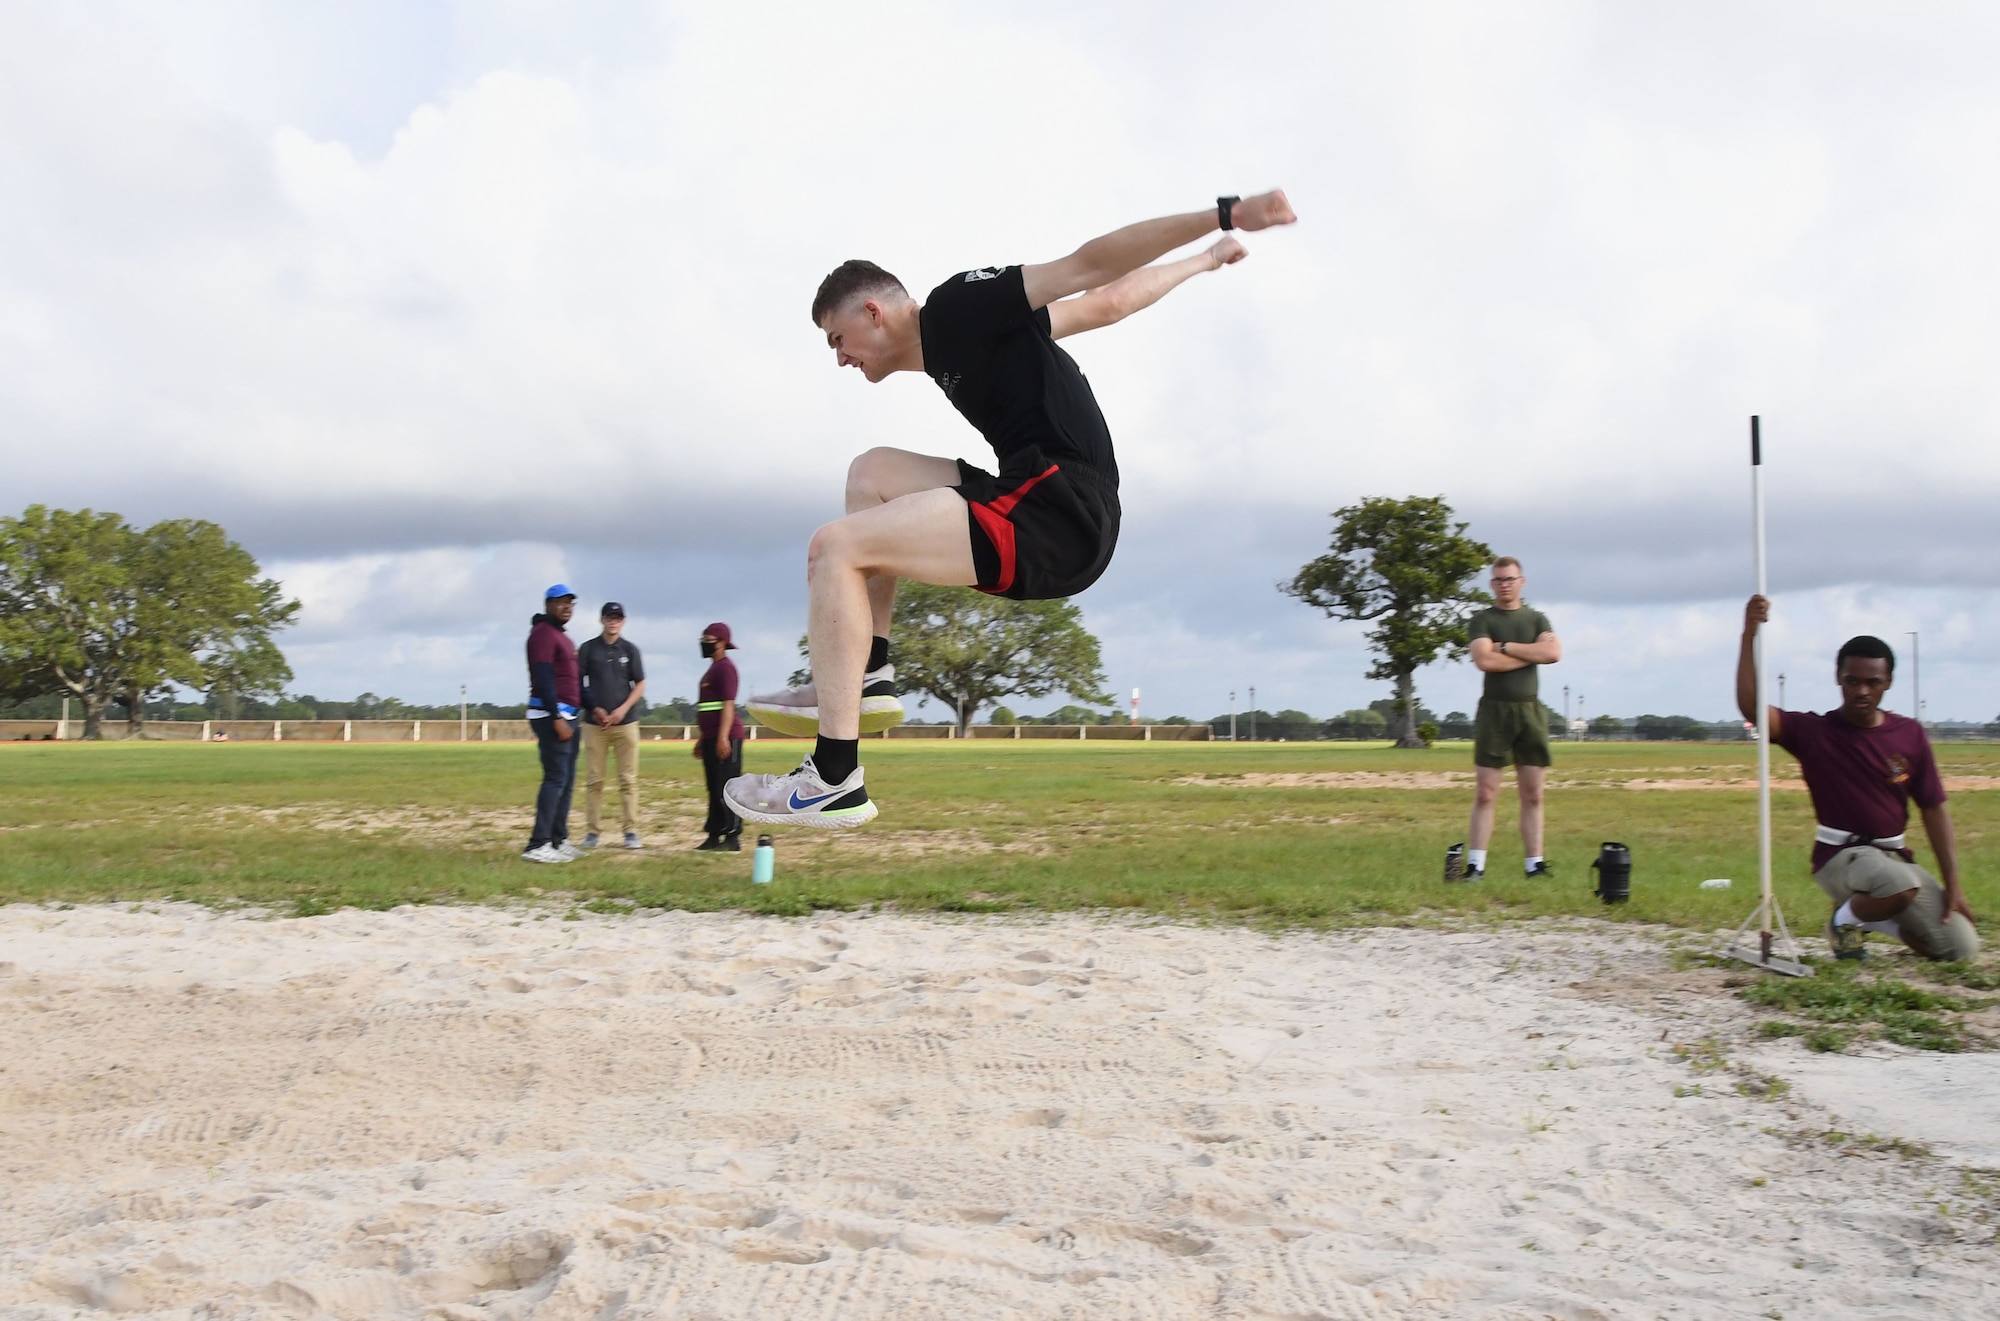 U.S. Air Force Airman Spencer Mullins, 338th Training Squadron student, participates in long jump during the 81st Training Group Olympics at Keesler Air Force Base, Mississippi, June 11, 2021. The event also included competitions in weight lifting, track, shot put and discus. (U.S. Air Force photo by Kemberly Groue)